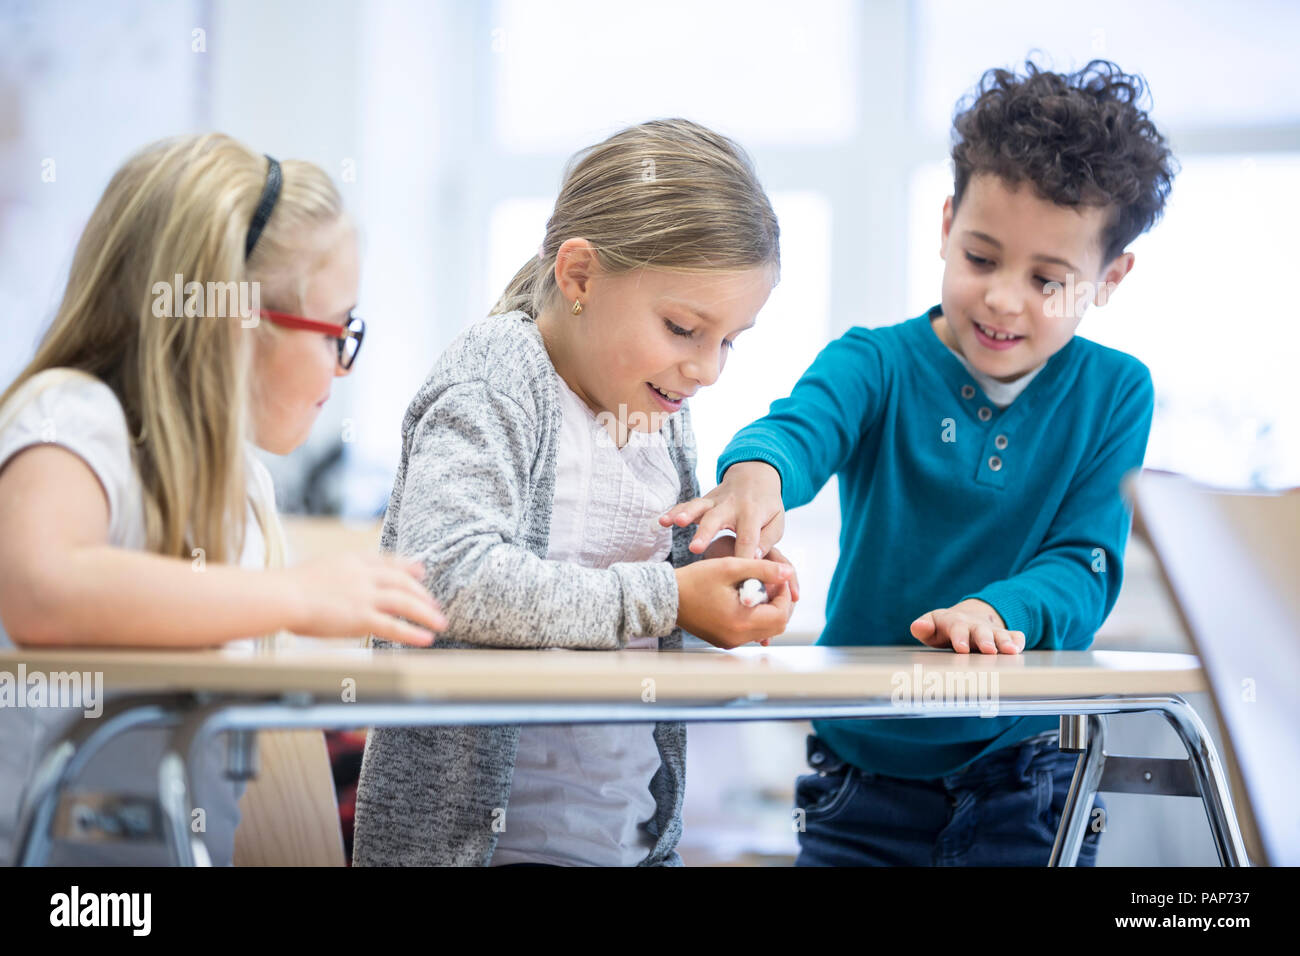 Three pupils in class stroking mouse Stock Photo